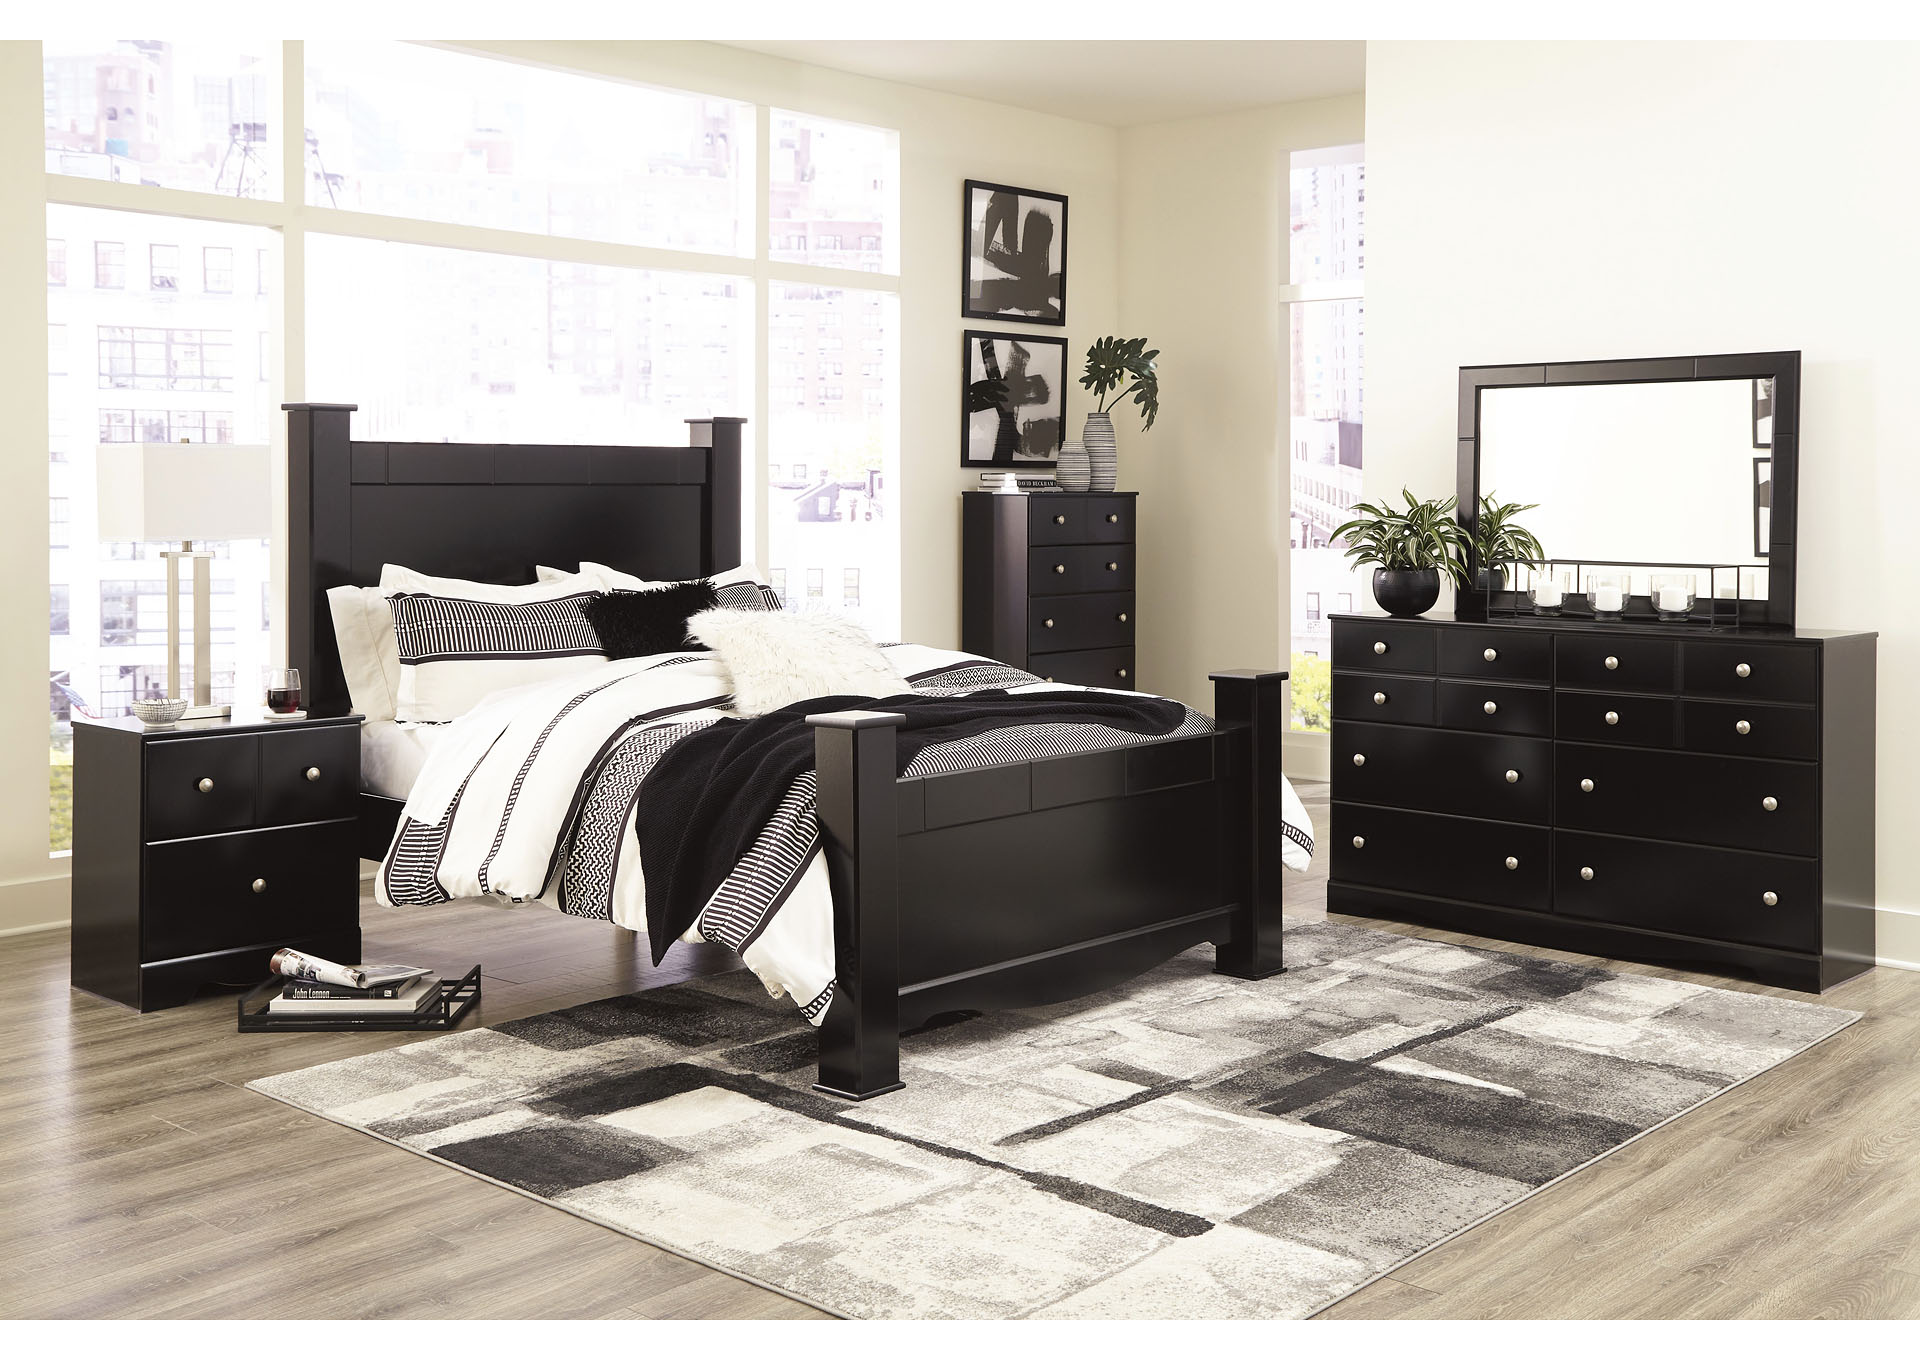 Mirlotown Queen Poster Bed w/ Chest, Nightstand, Dresser & Mirror,In-Store Product